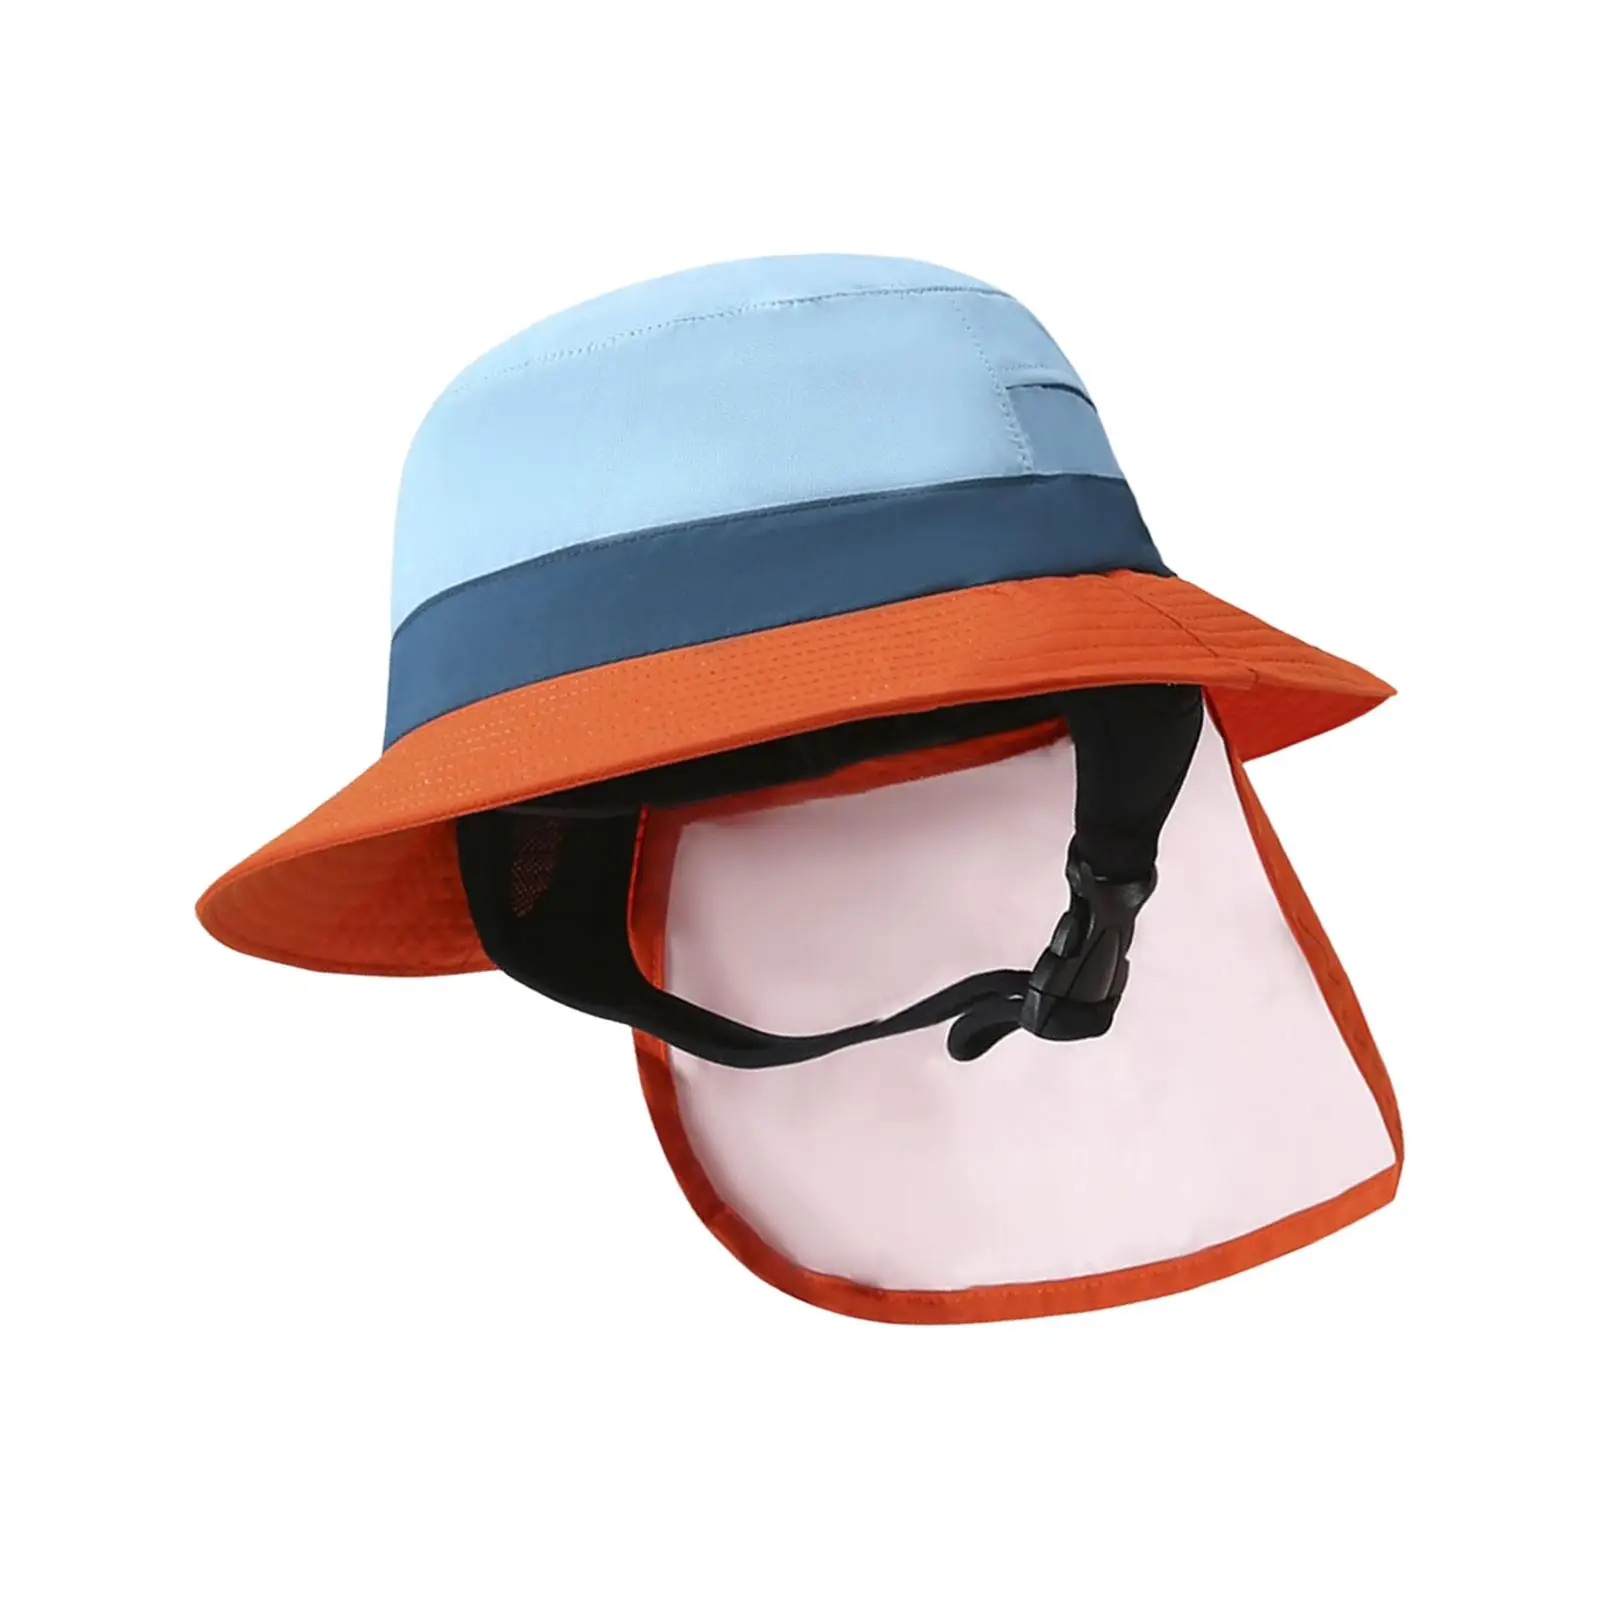 Surf Bucket Hat Protection Wide Brim for Boating Beach Men Women Teens